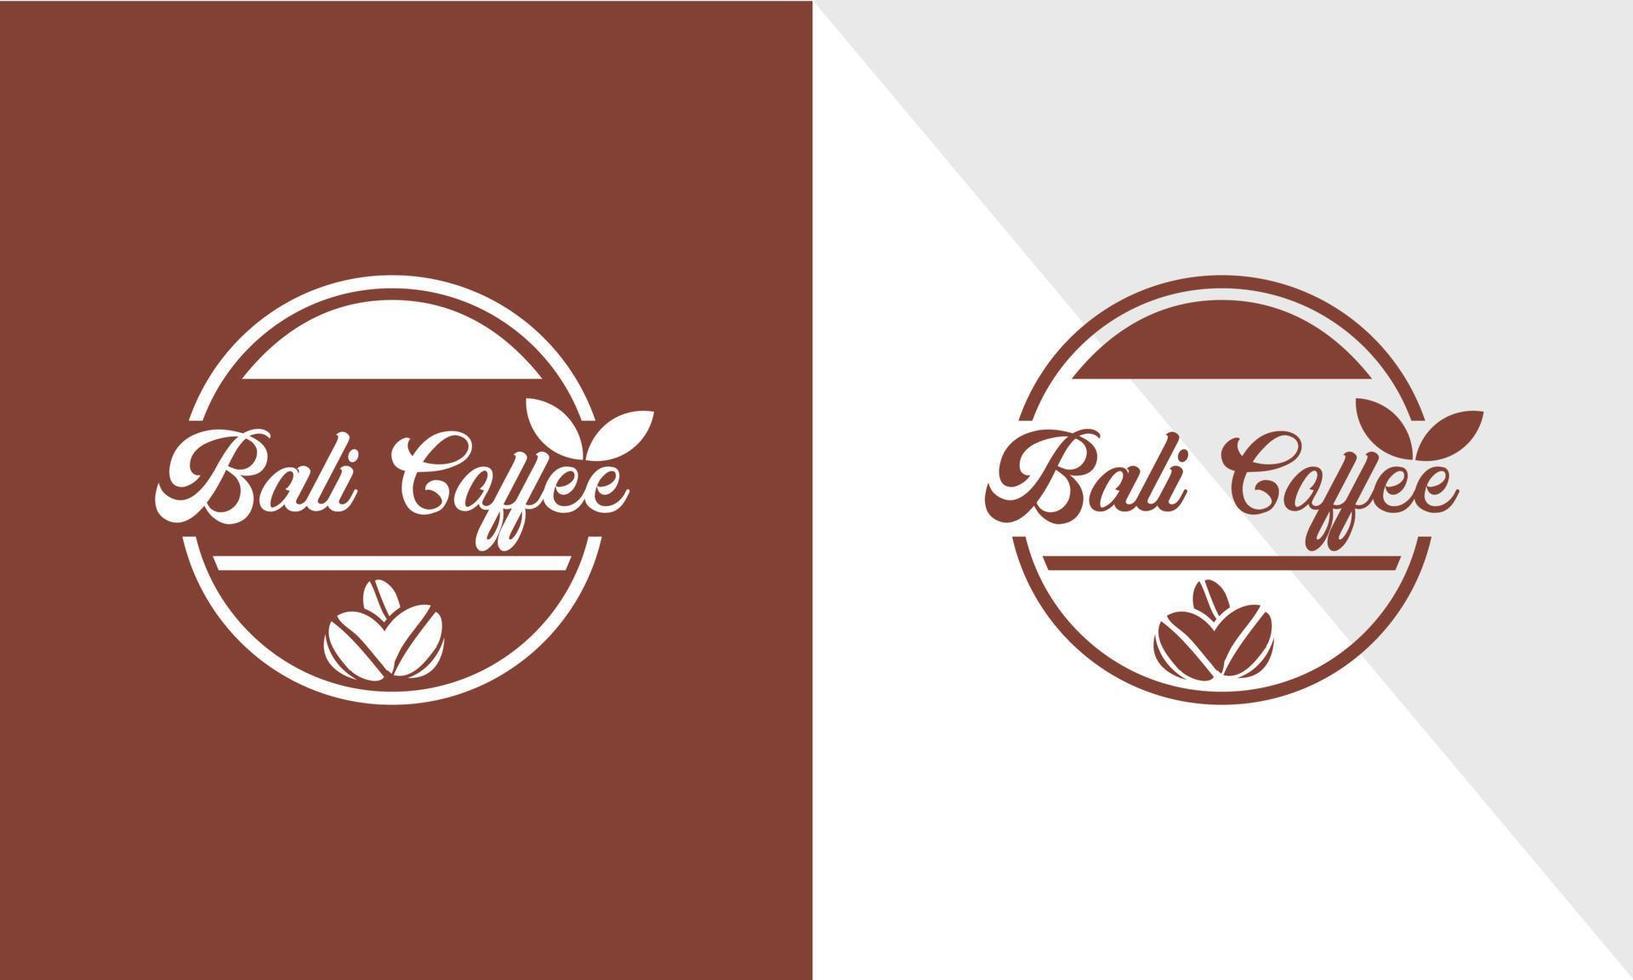 Coffee logo Design Vector Template Element. Logotypes collection for coffee shops, cafes, and restaurants. Vector illustration. Hipster and retro style. Design vector